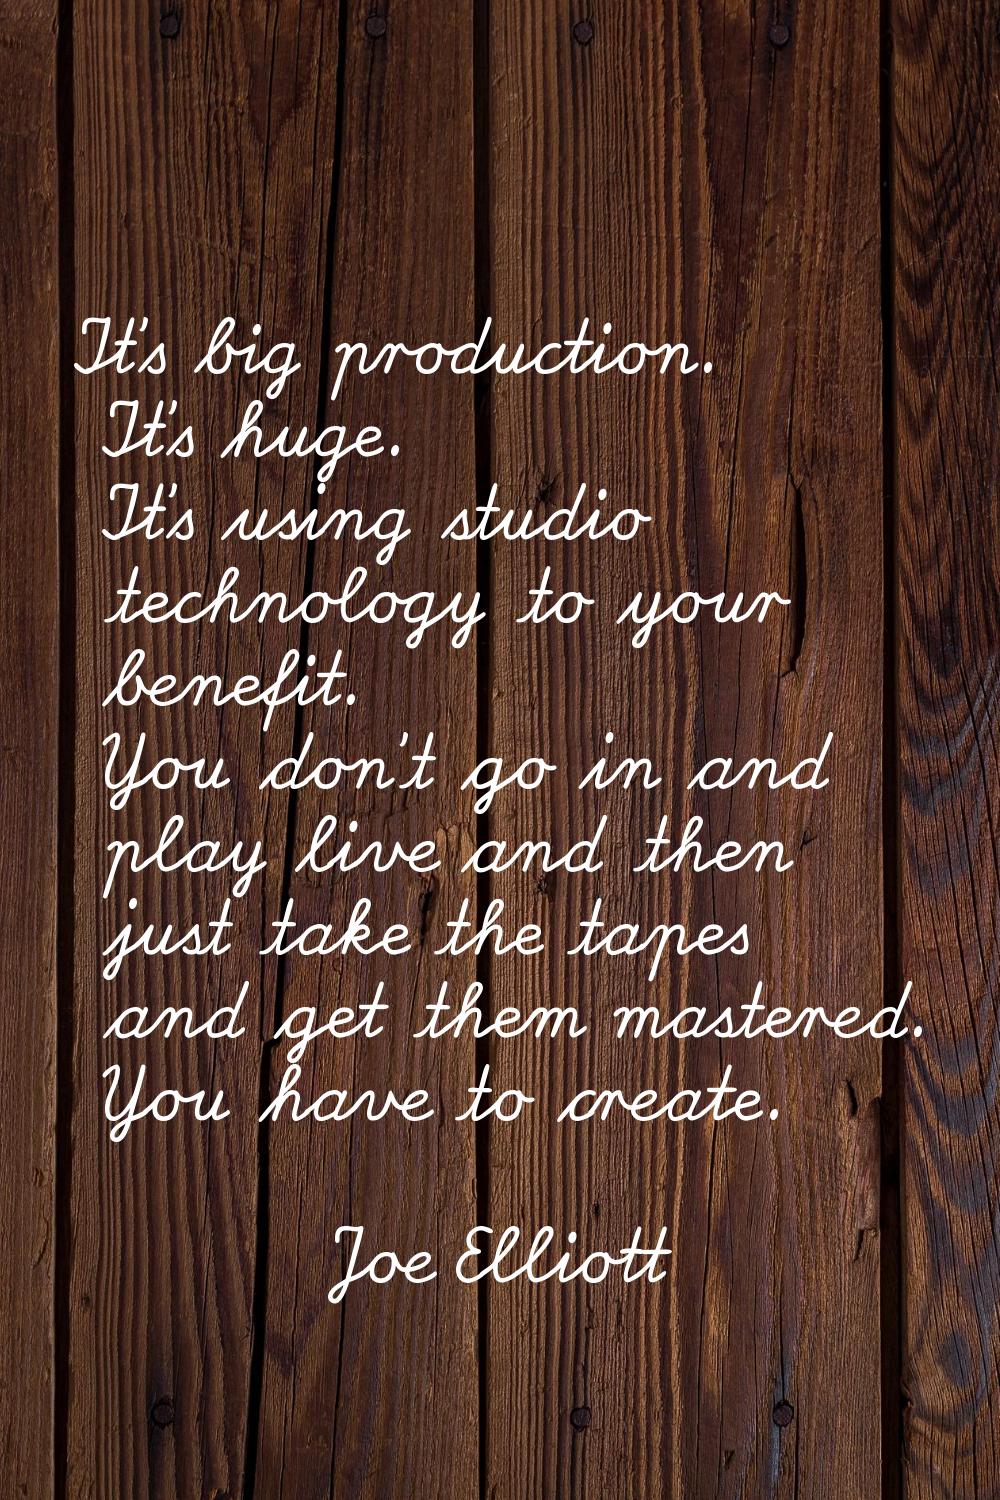 It's big production. It's huge. It's using studio technology to your benefit. You don't go in and p